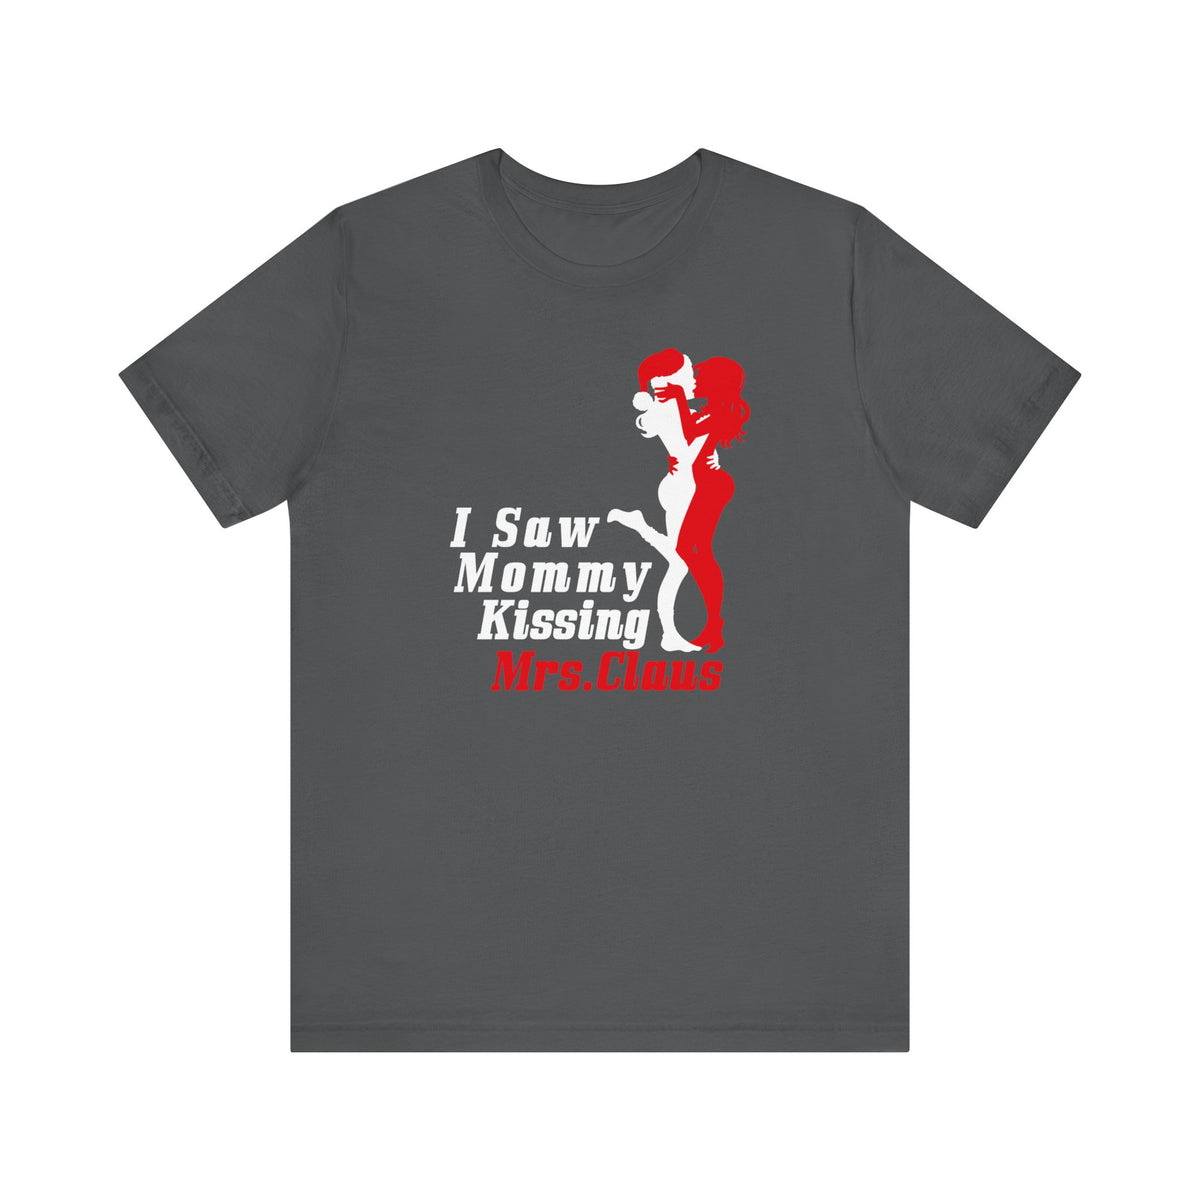 I Saw Mommy Kissing Mrs. Claus - Men's T-Shirt